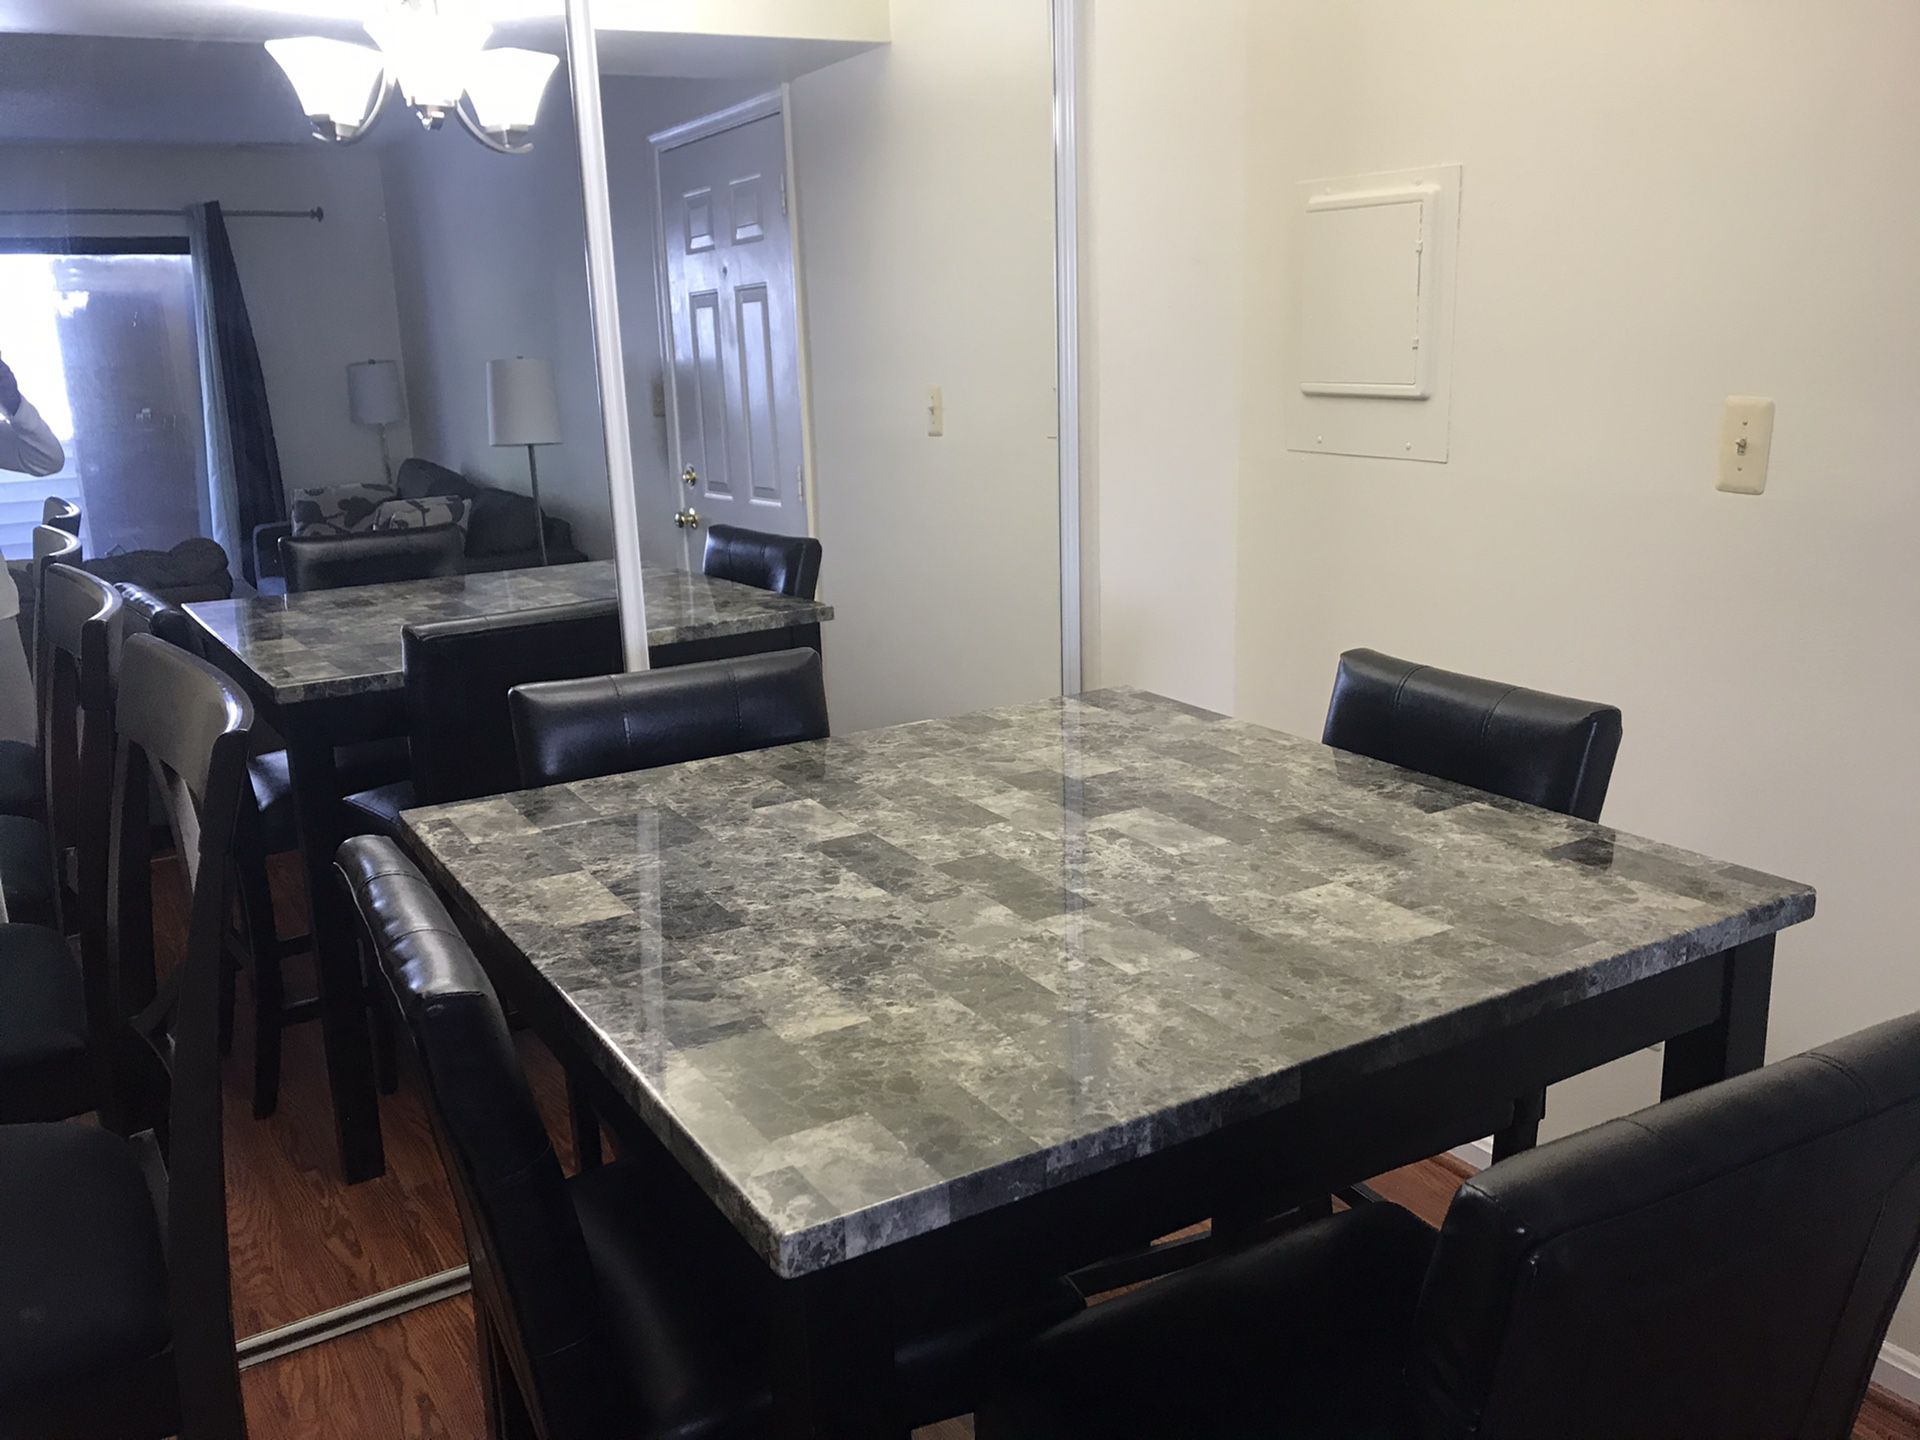 Dining room table w/ four chairs